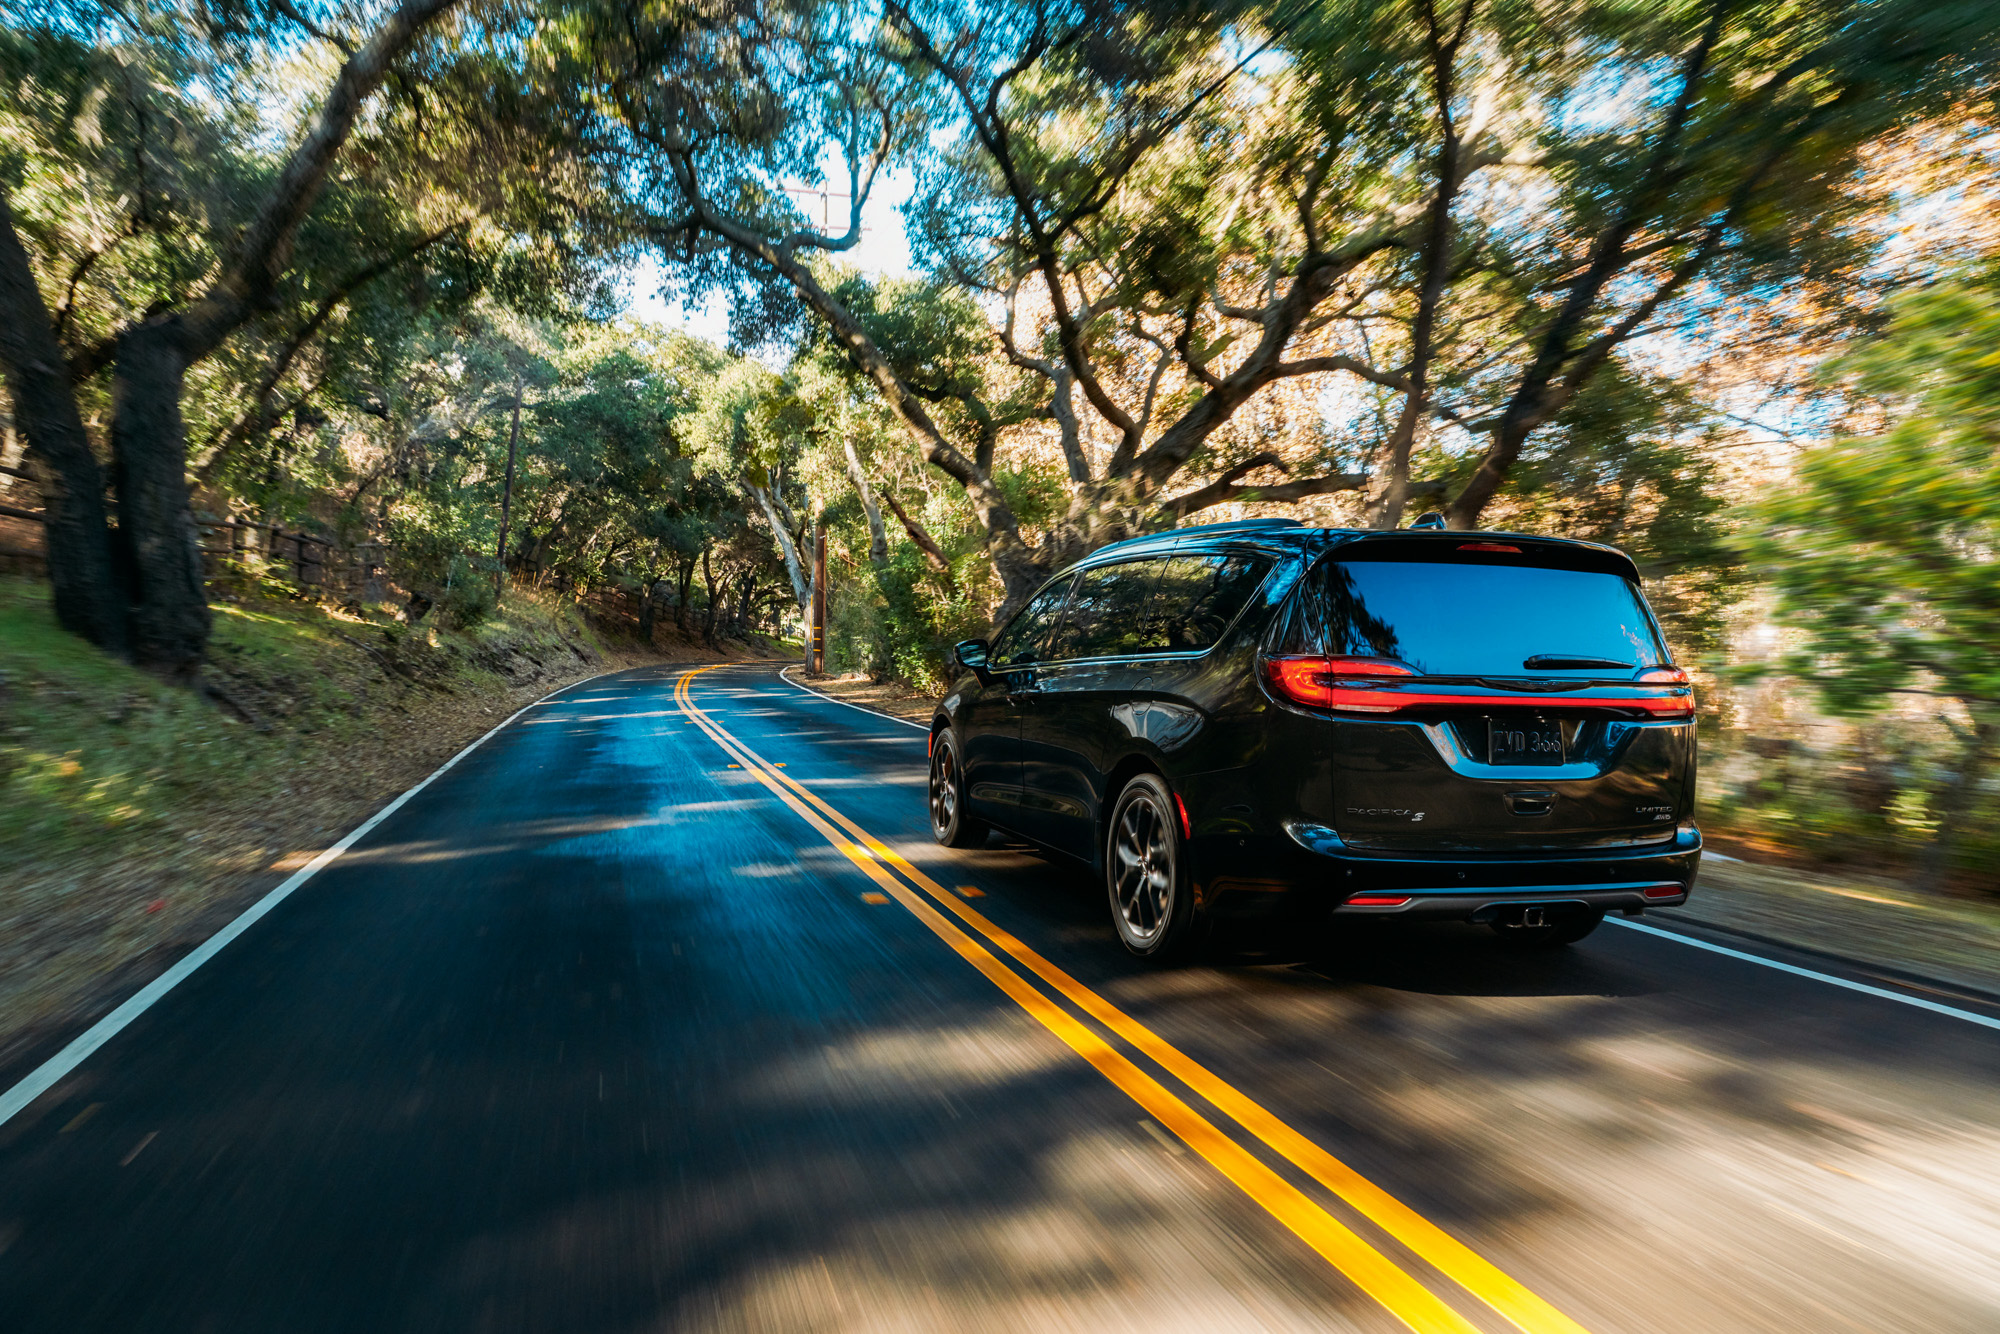 Los Angeles commercial photographer Caleb Kuhl's lifestyle car photography for Chrysler Pacifica